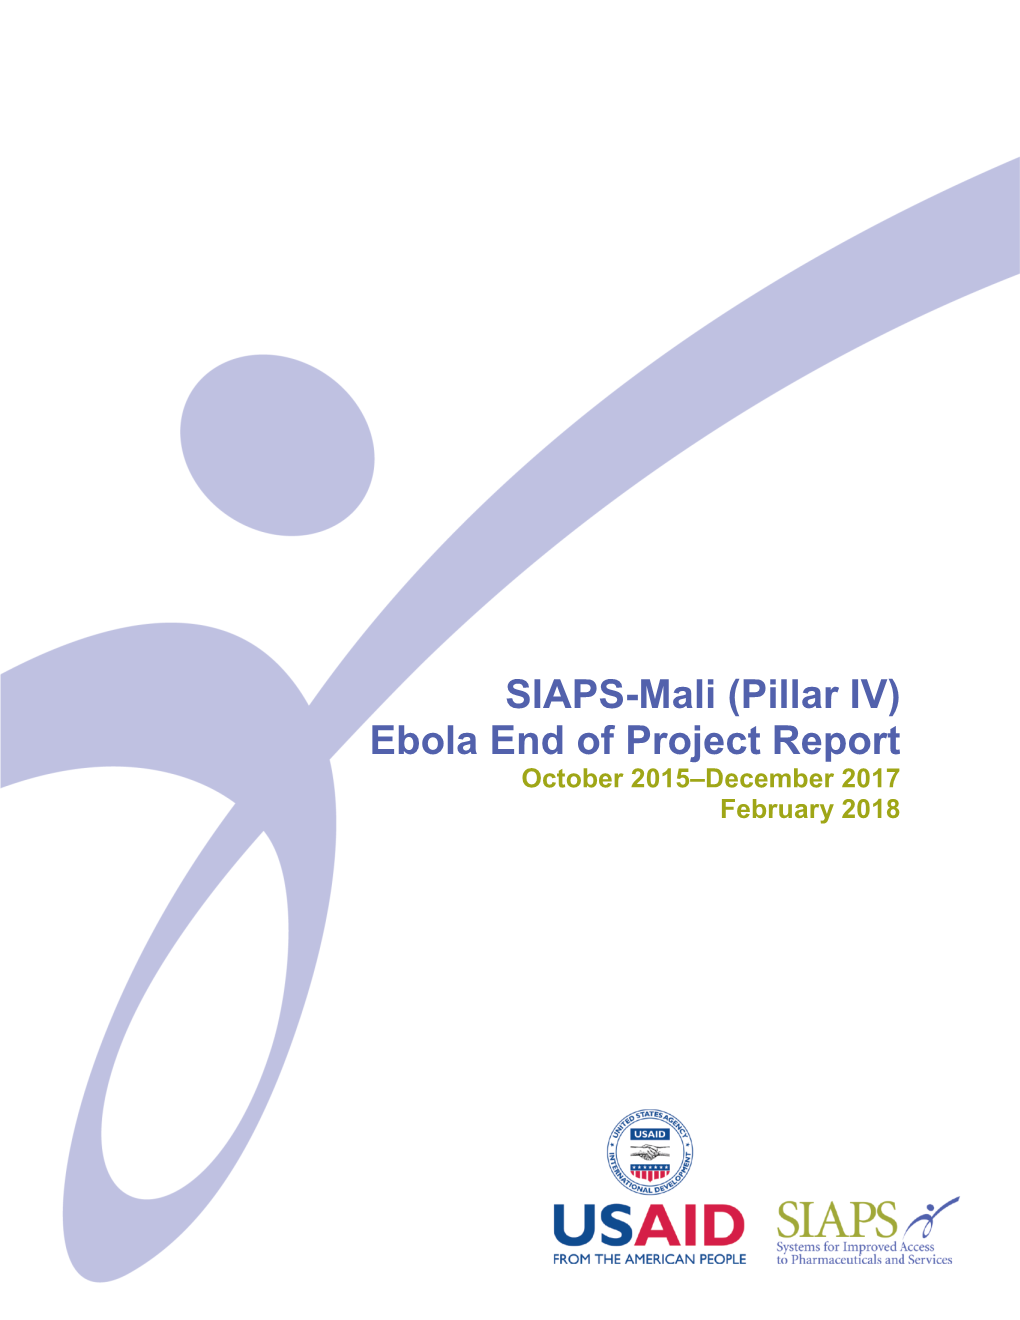 SIAPS-Mali (Pillar IV) Ebola End of Project Report October 2015–December 2017 February 2018